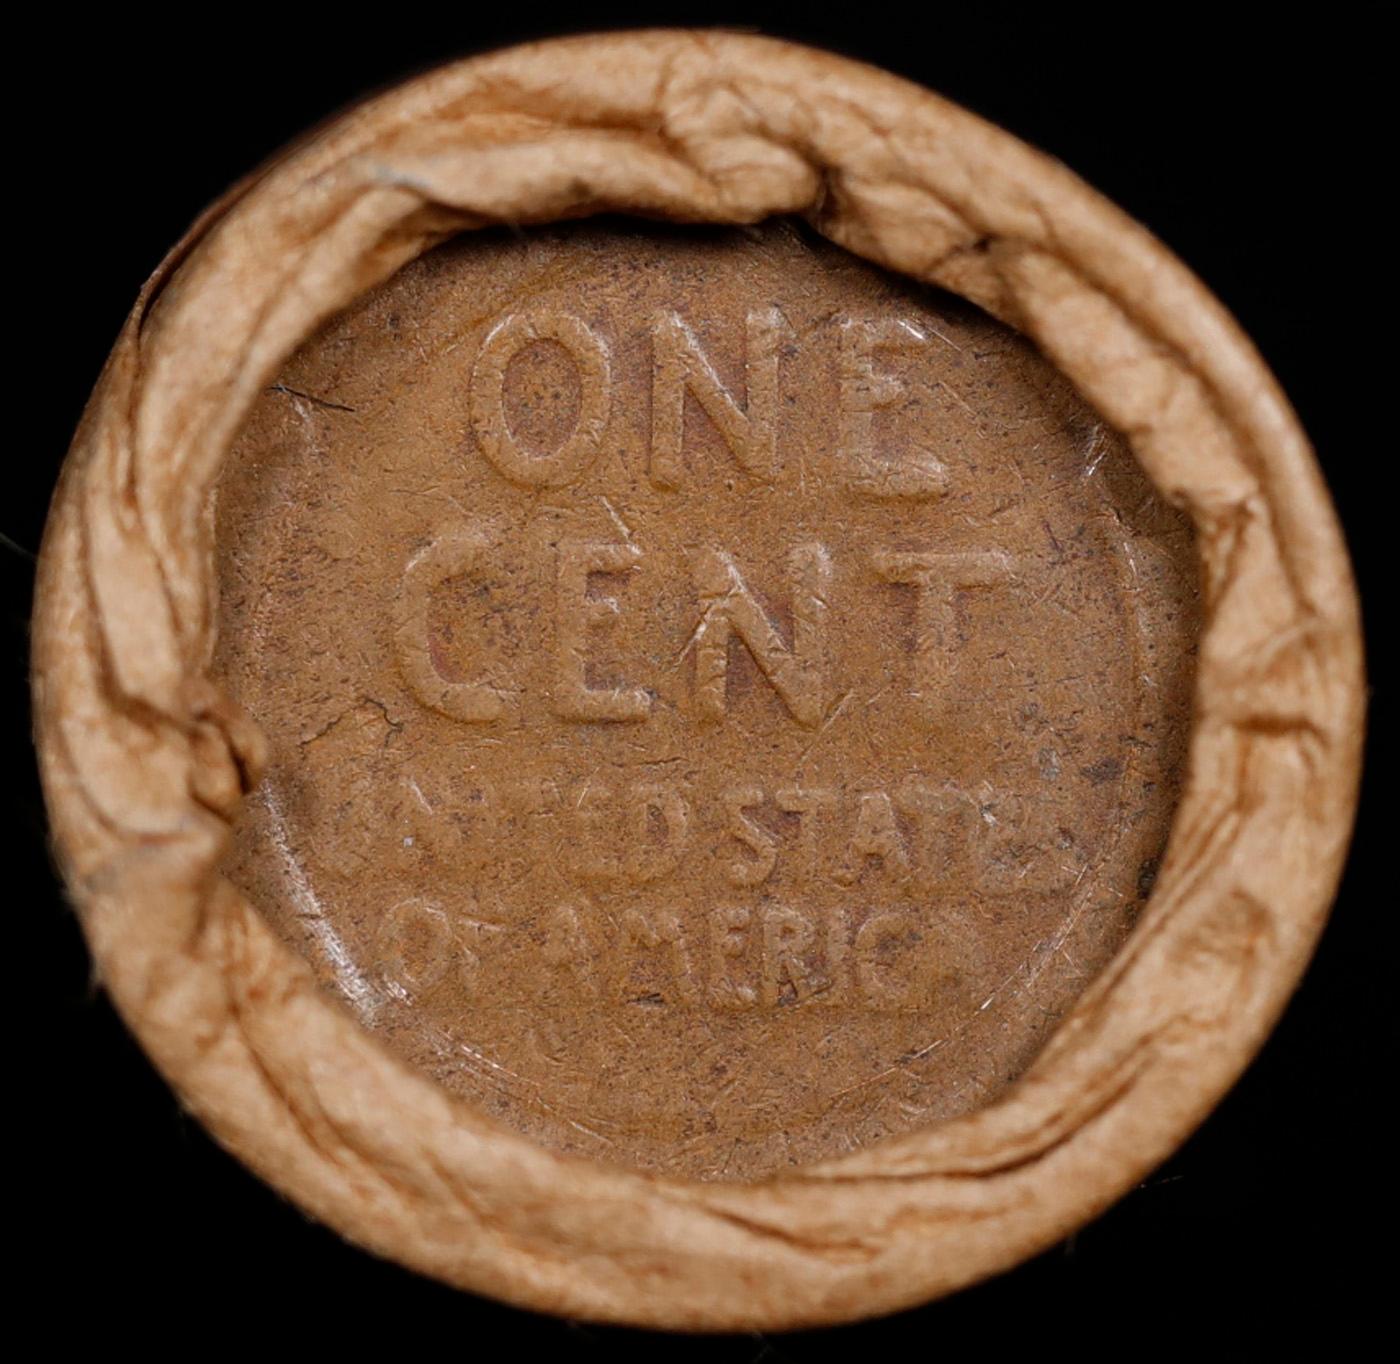 Lincoln Wheat Cent 1c Mixed Roll Orig Brandt McDonalds Wrapper, 1916-s end, Wheat other end